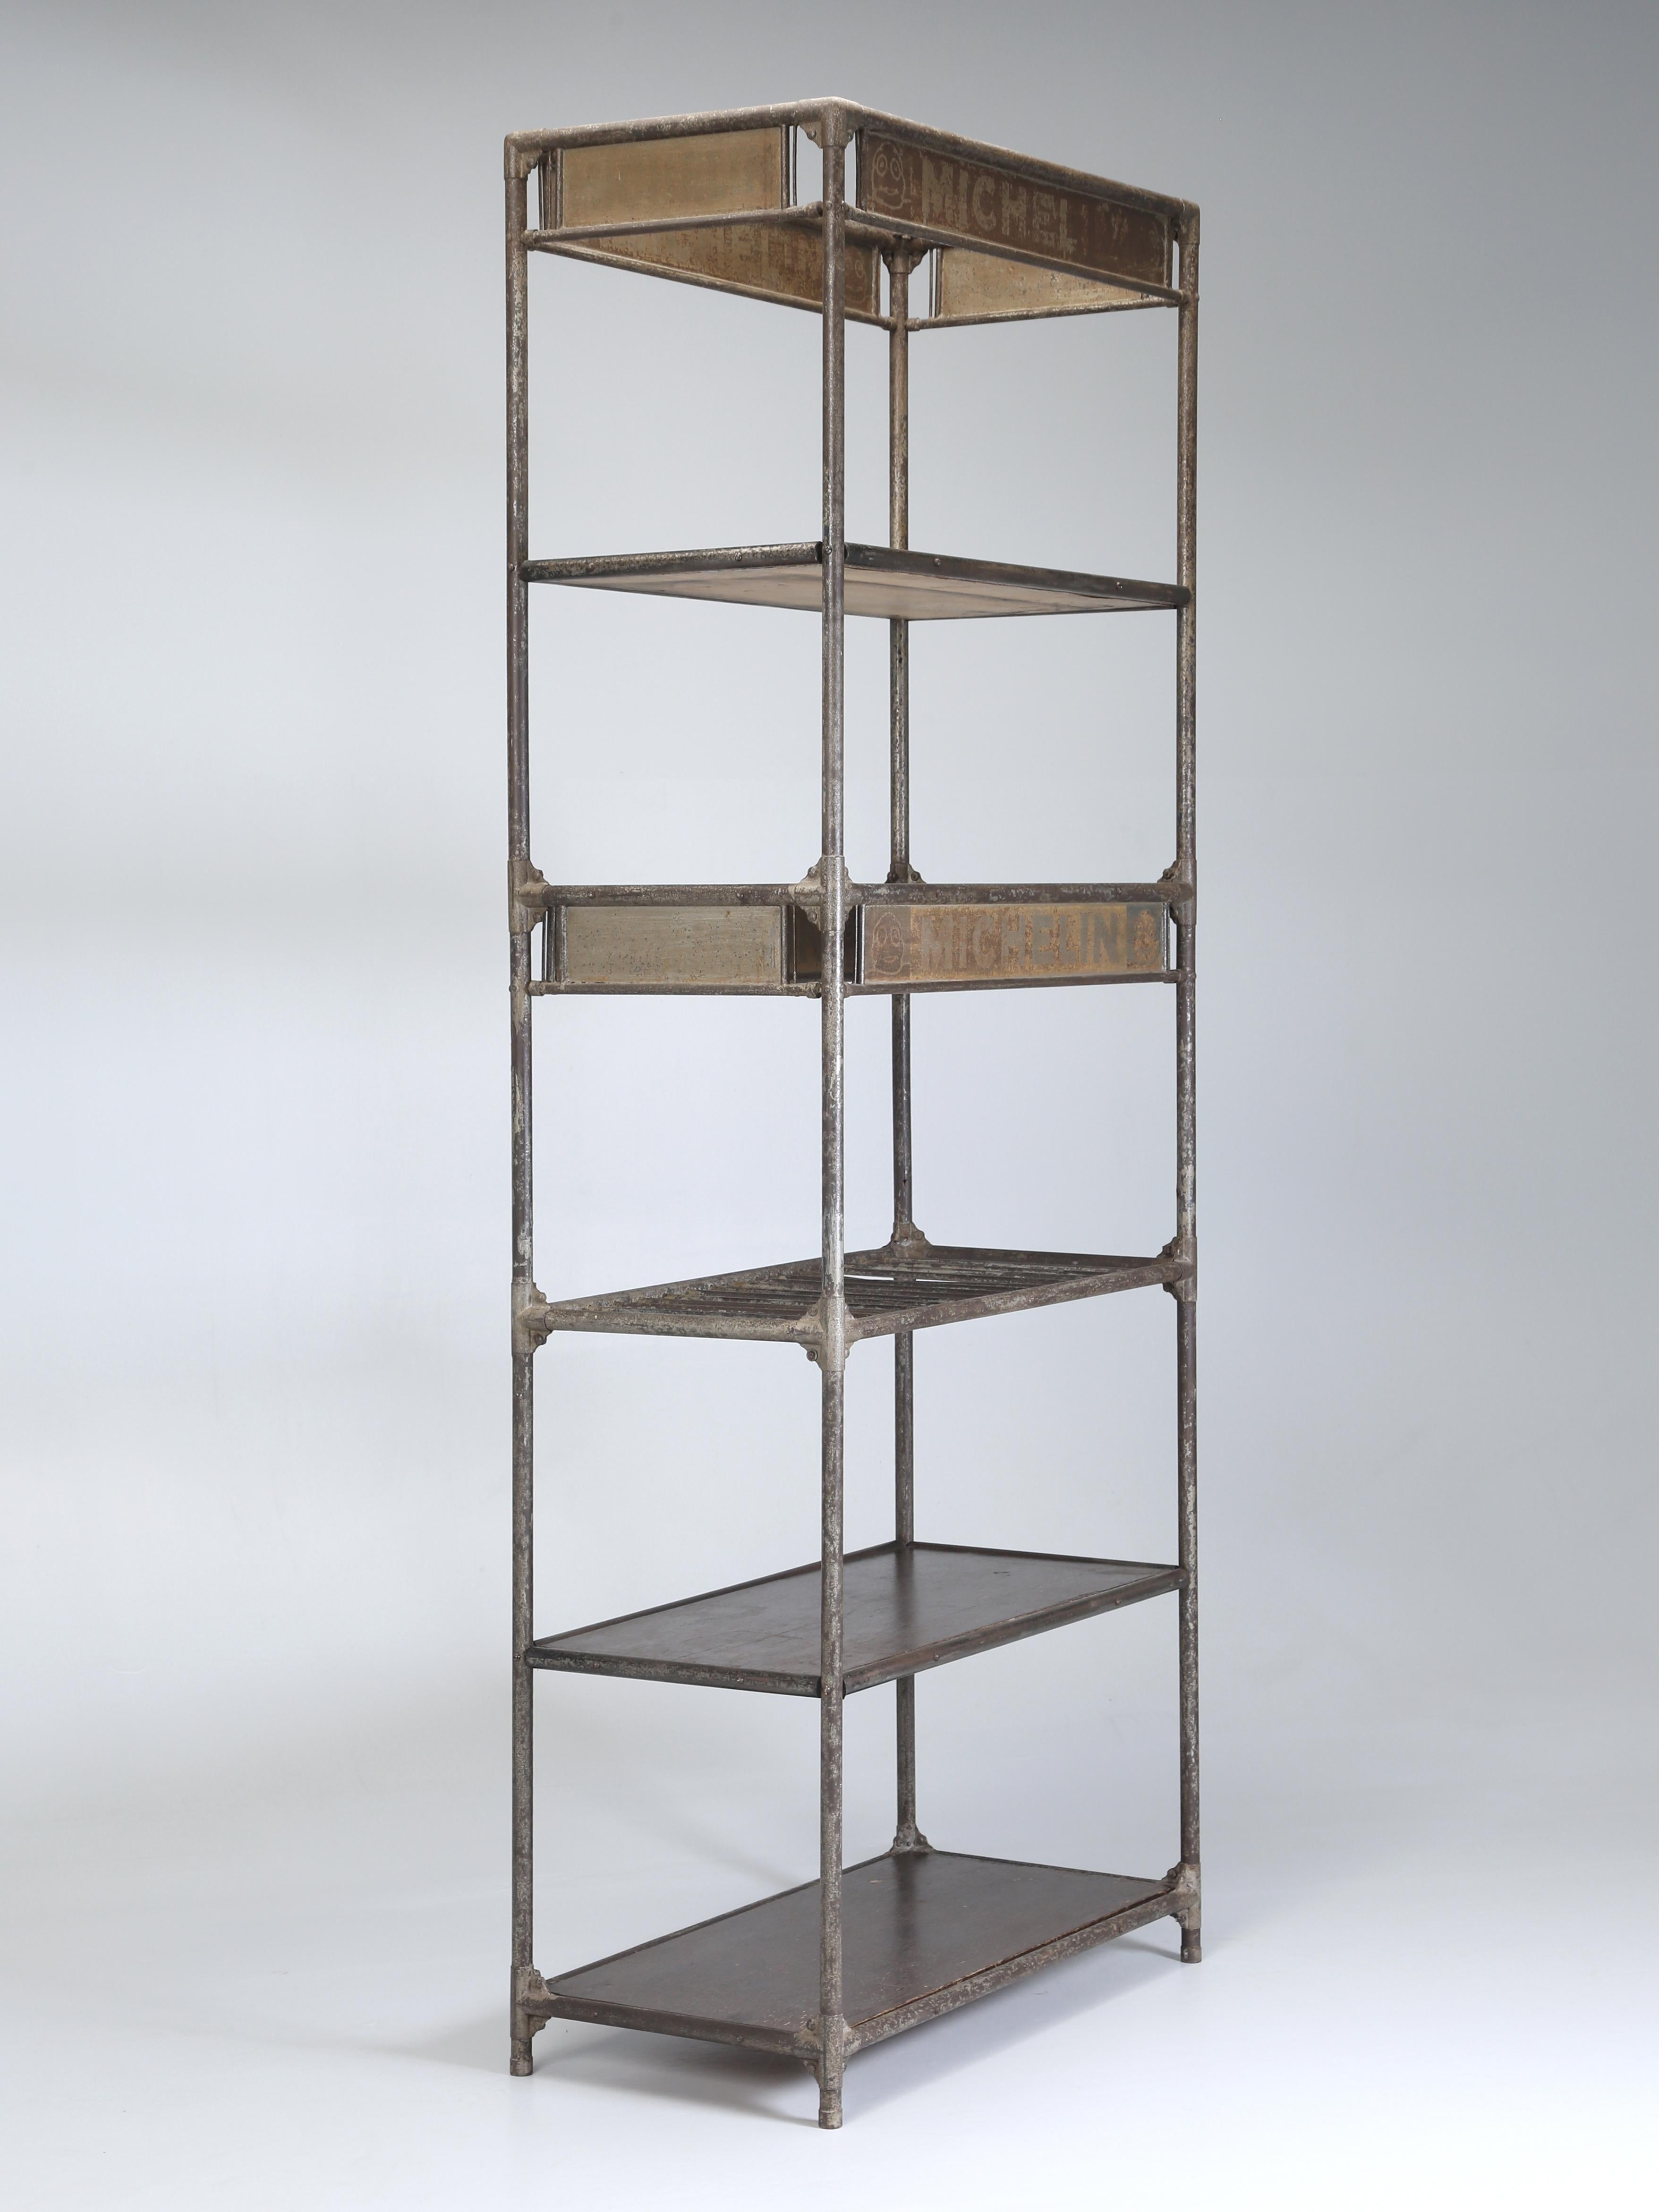 Michelin Antique French Industrial Steel Shelf Unit Made in France c1900-1920 For Sale 6